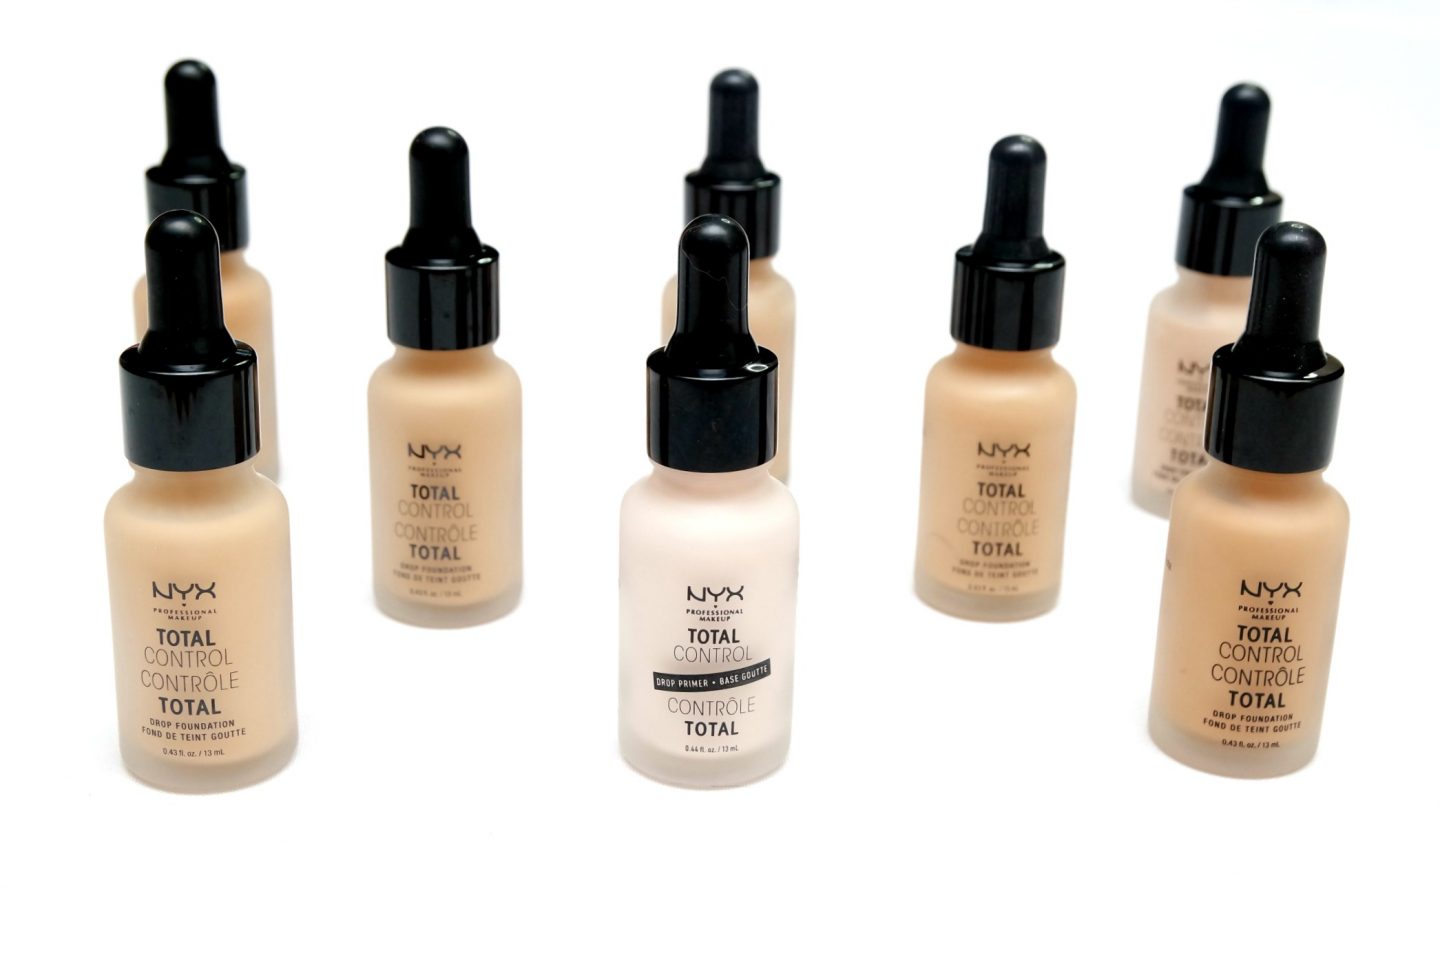 nyx total control drop foundation review